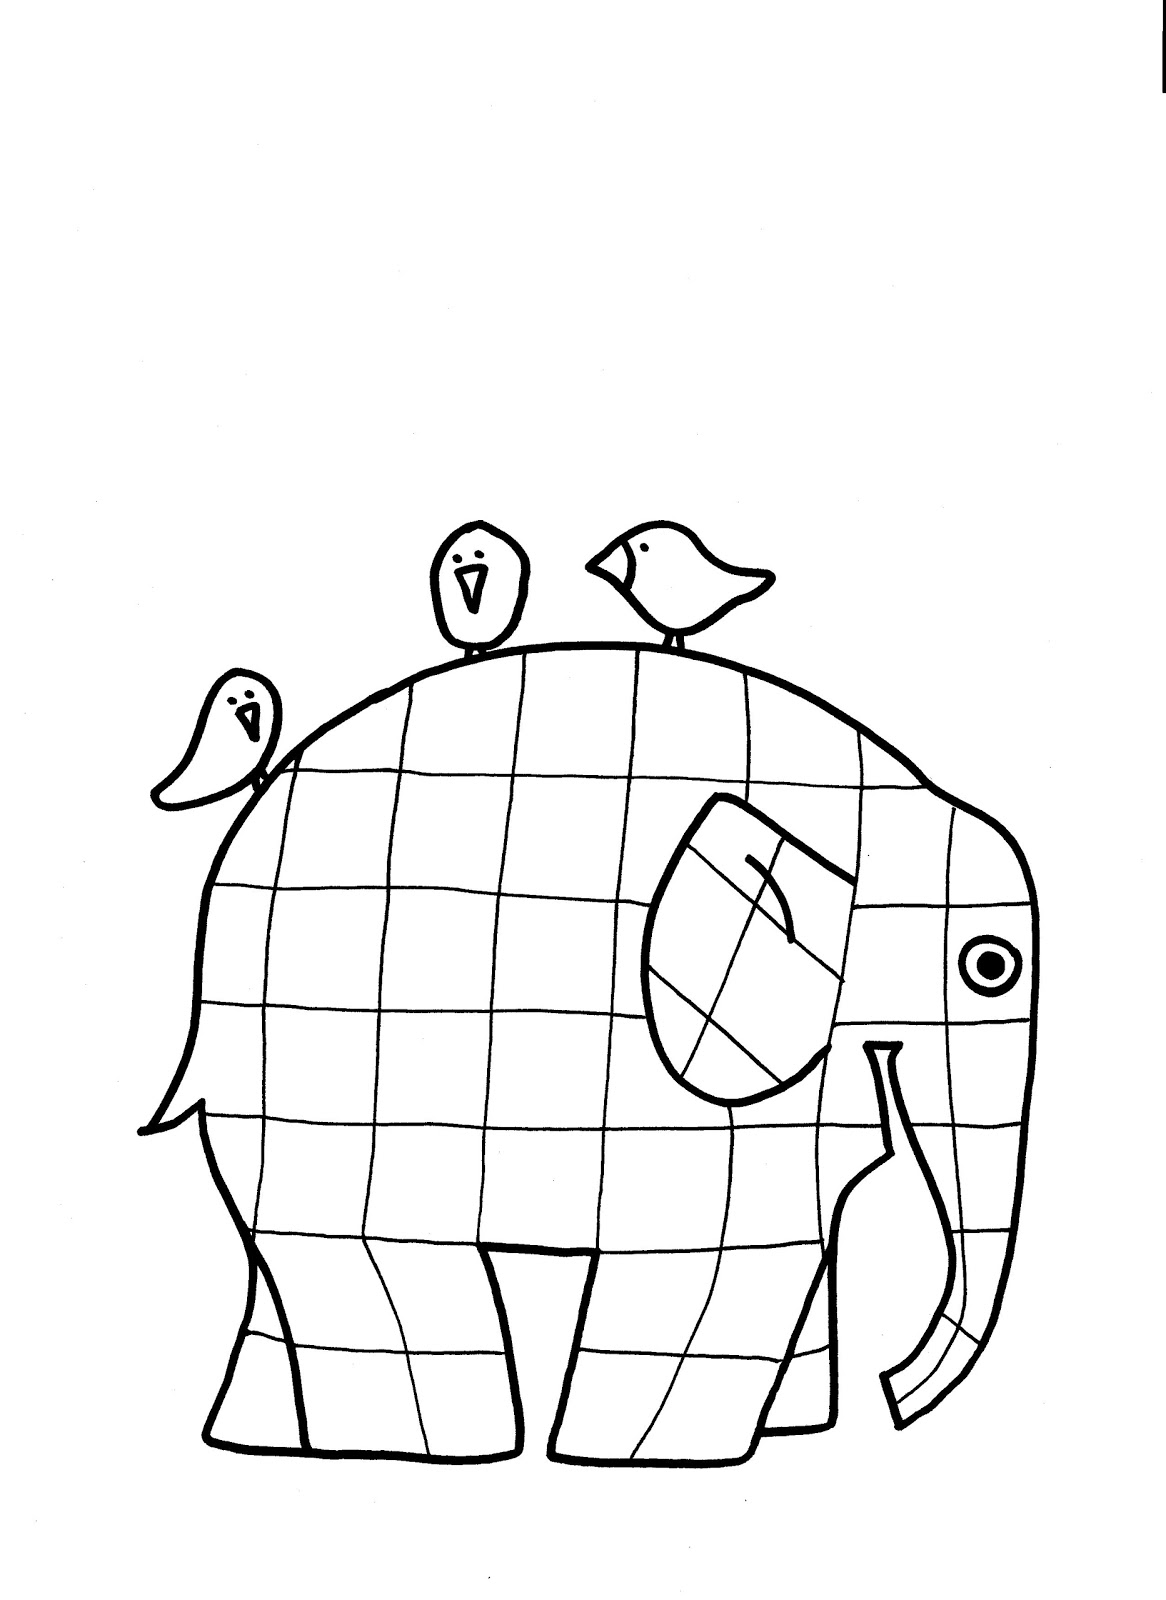 Download Elmer the Patchwork Elephant Coloring Page - Lines Across